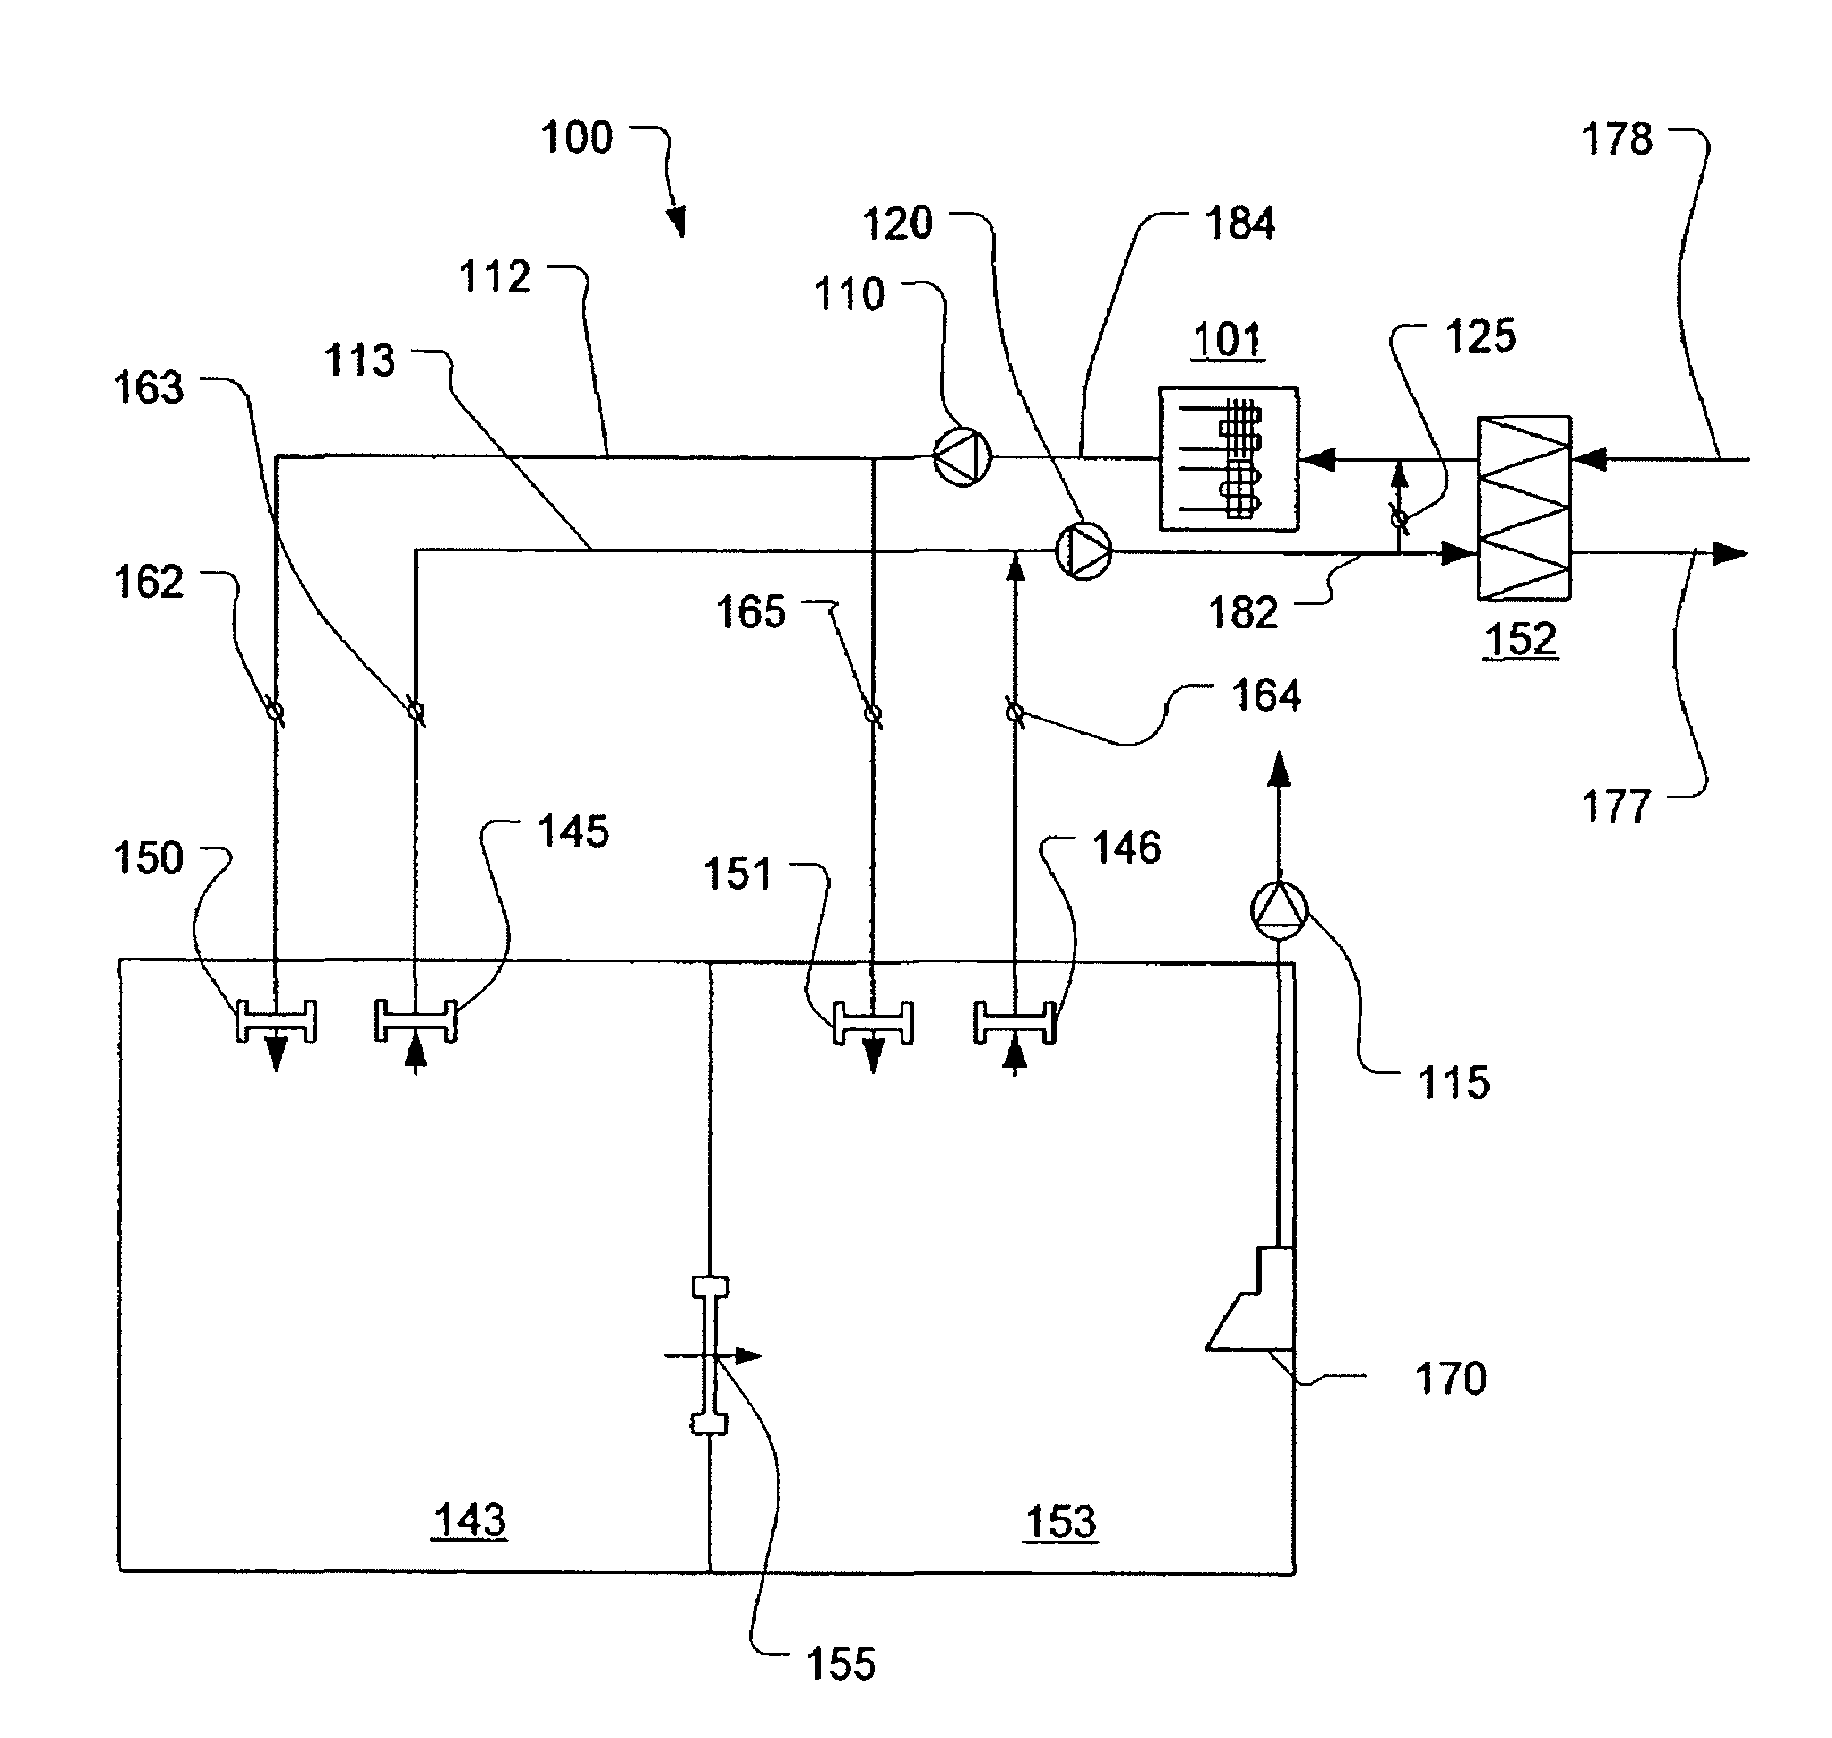 Method and apparatus for controlling space conditioning in an occupied space